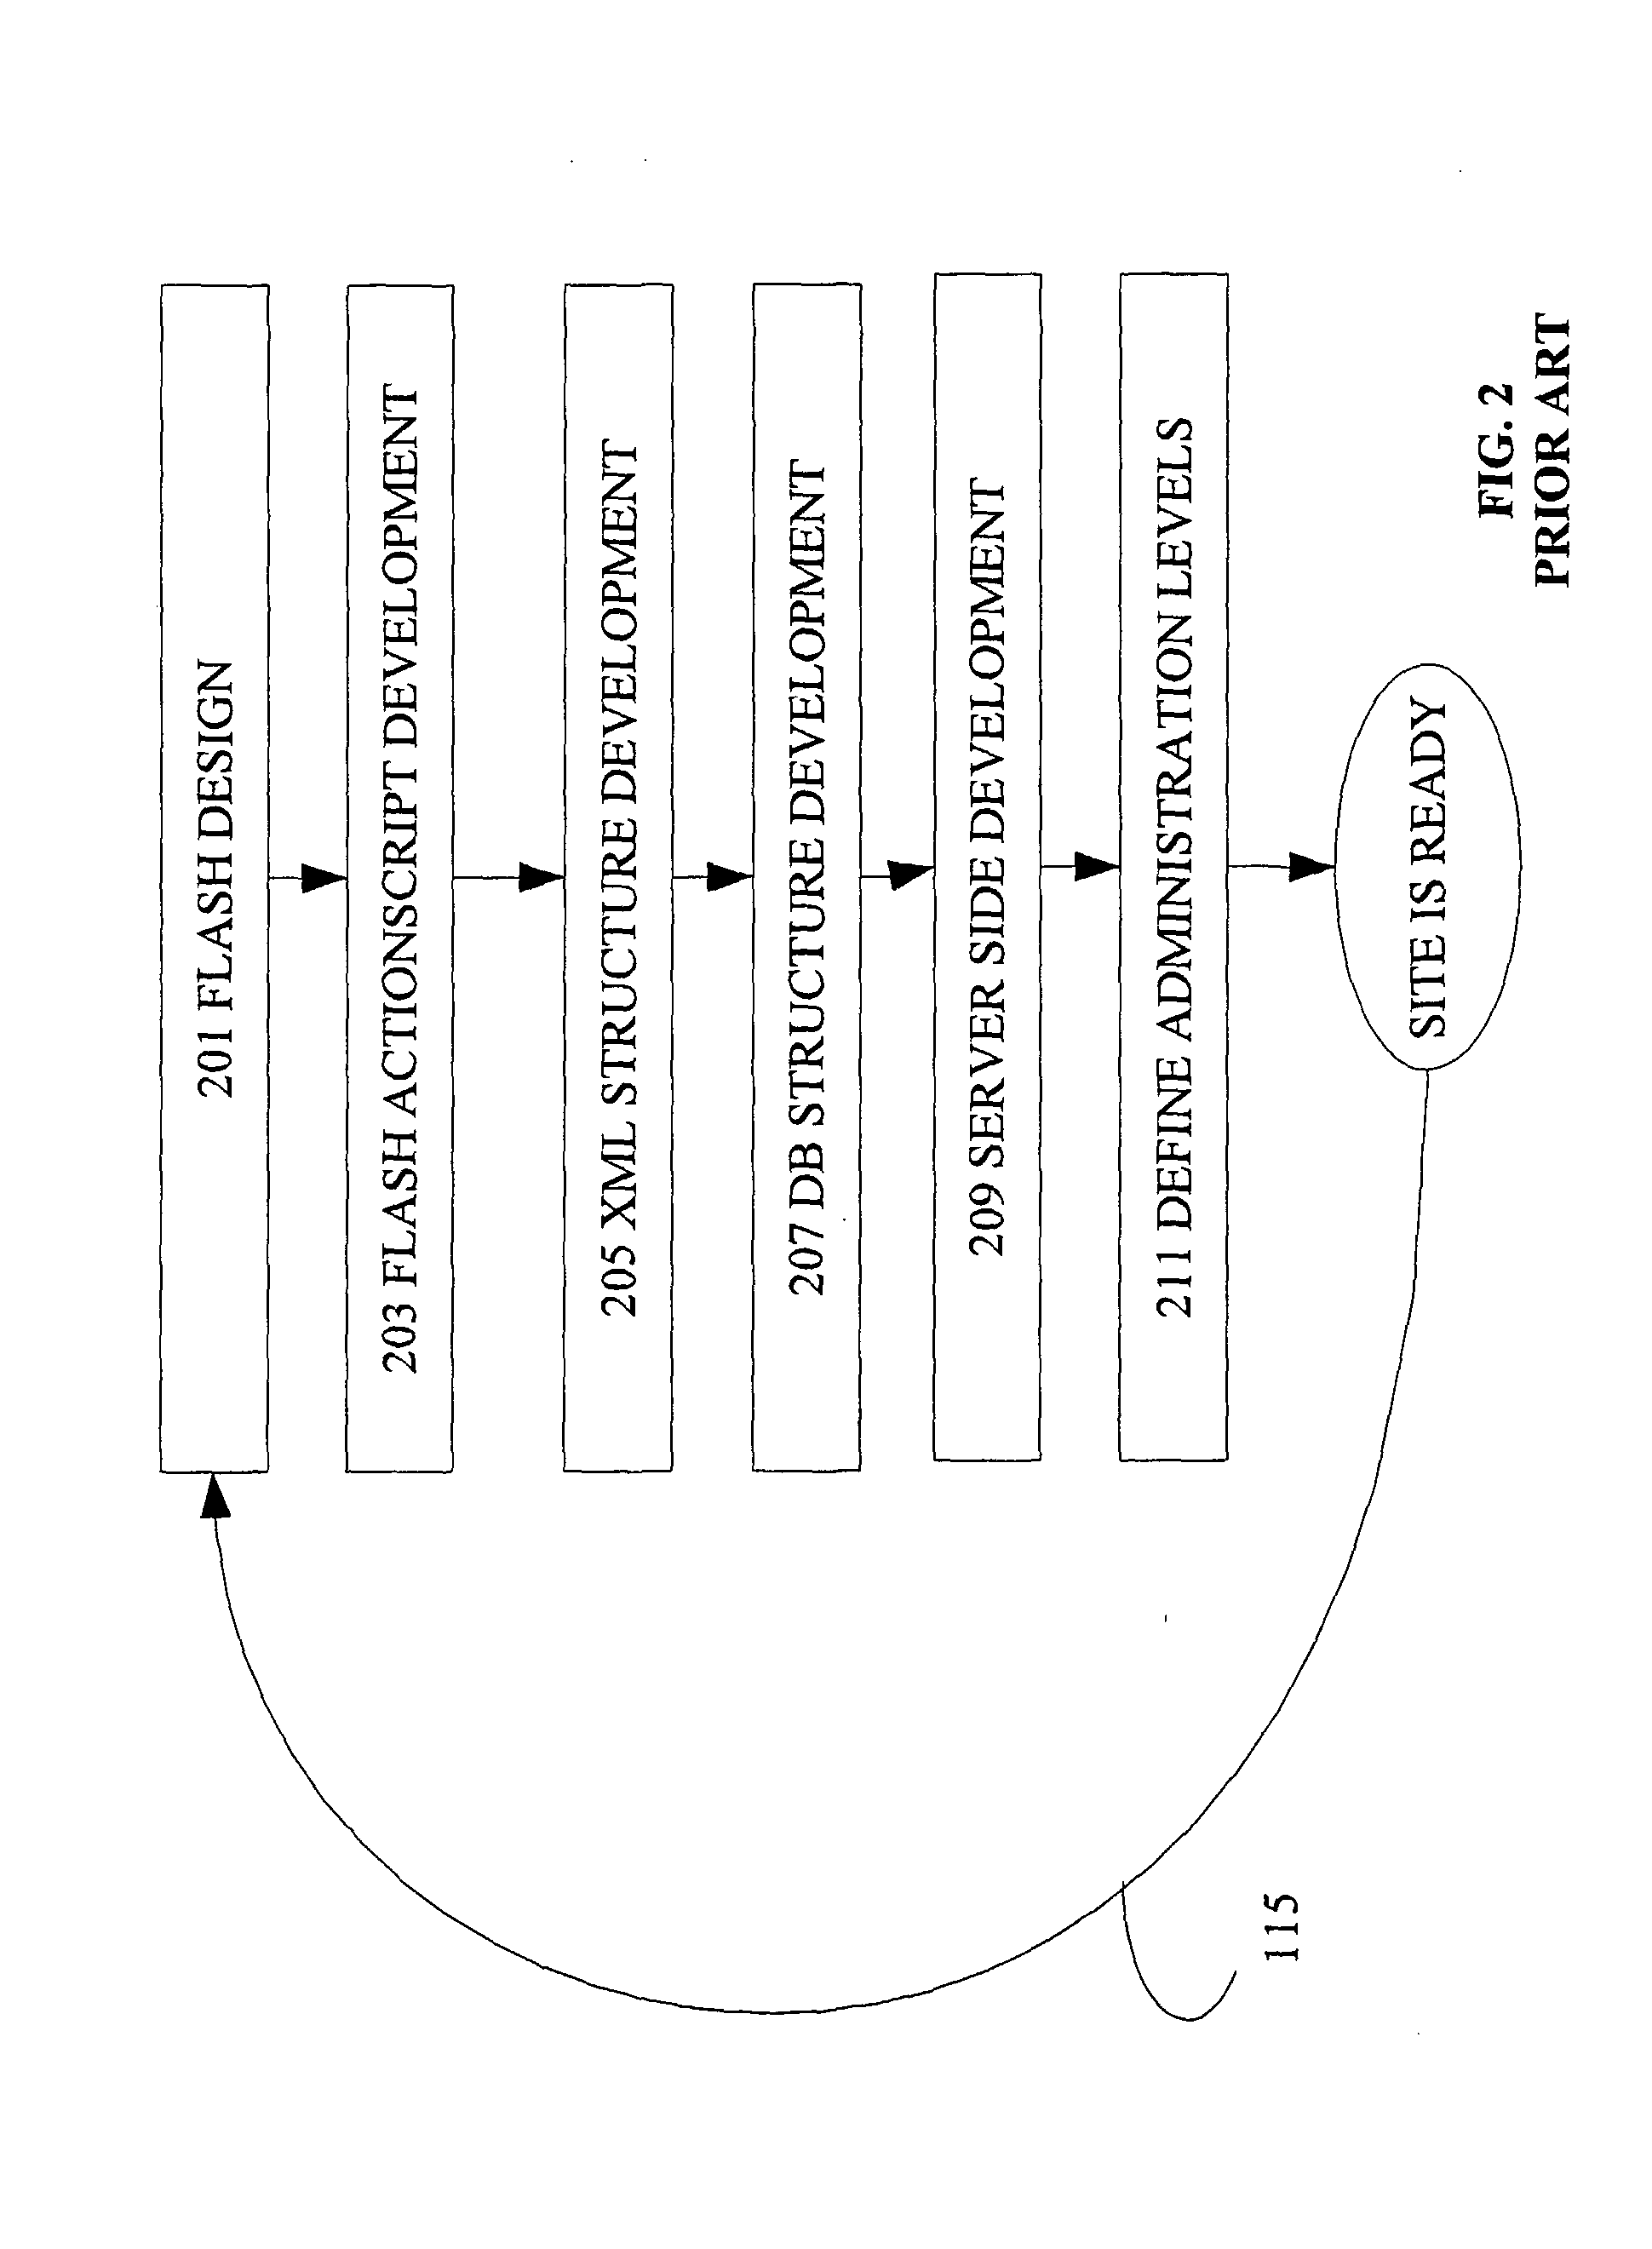 System and Method for Managing Content of Rich Media